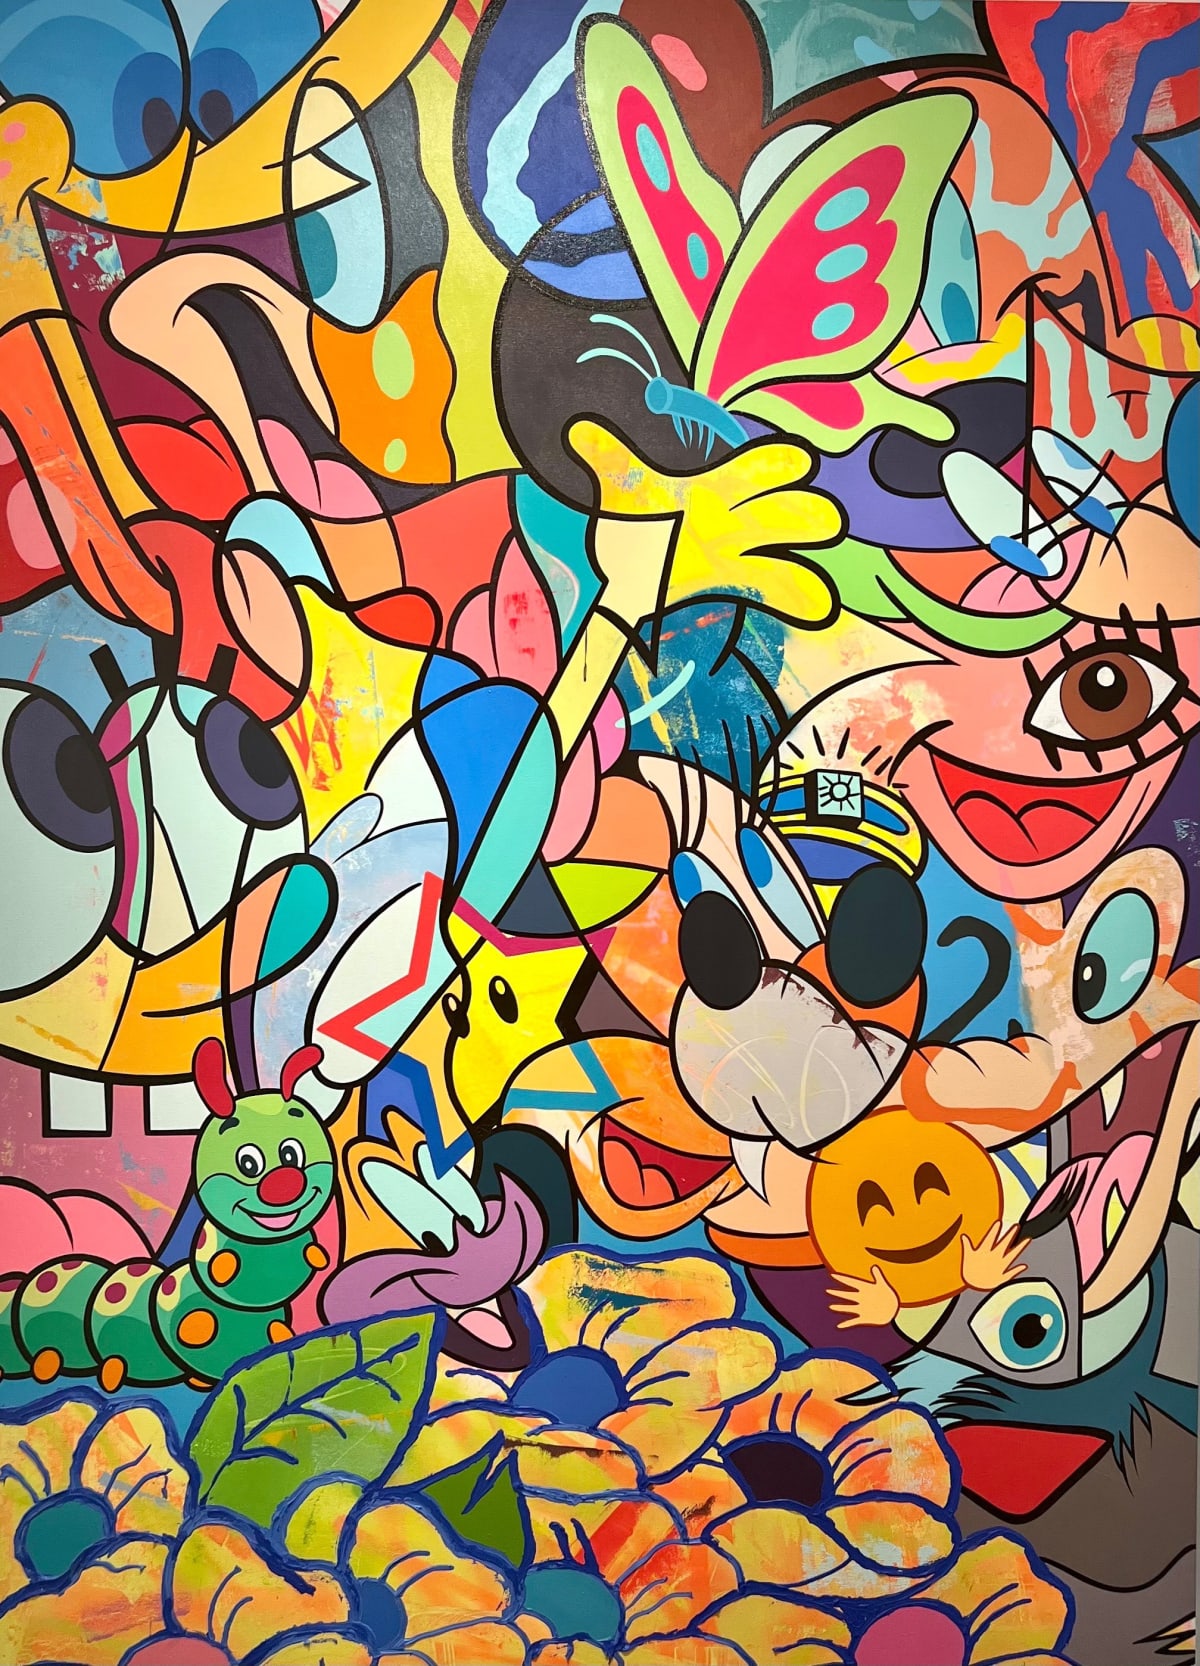 Timmy Sneaks colorful pop art painting that features Spongebob as well as many other references.